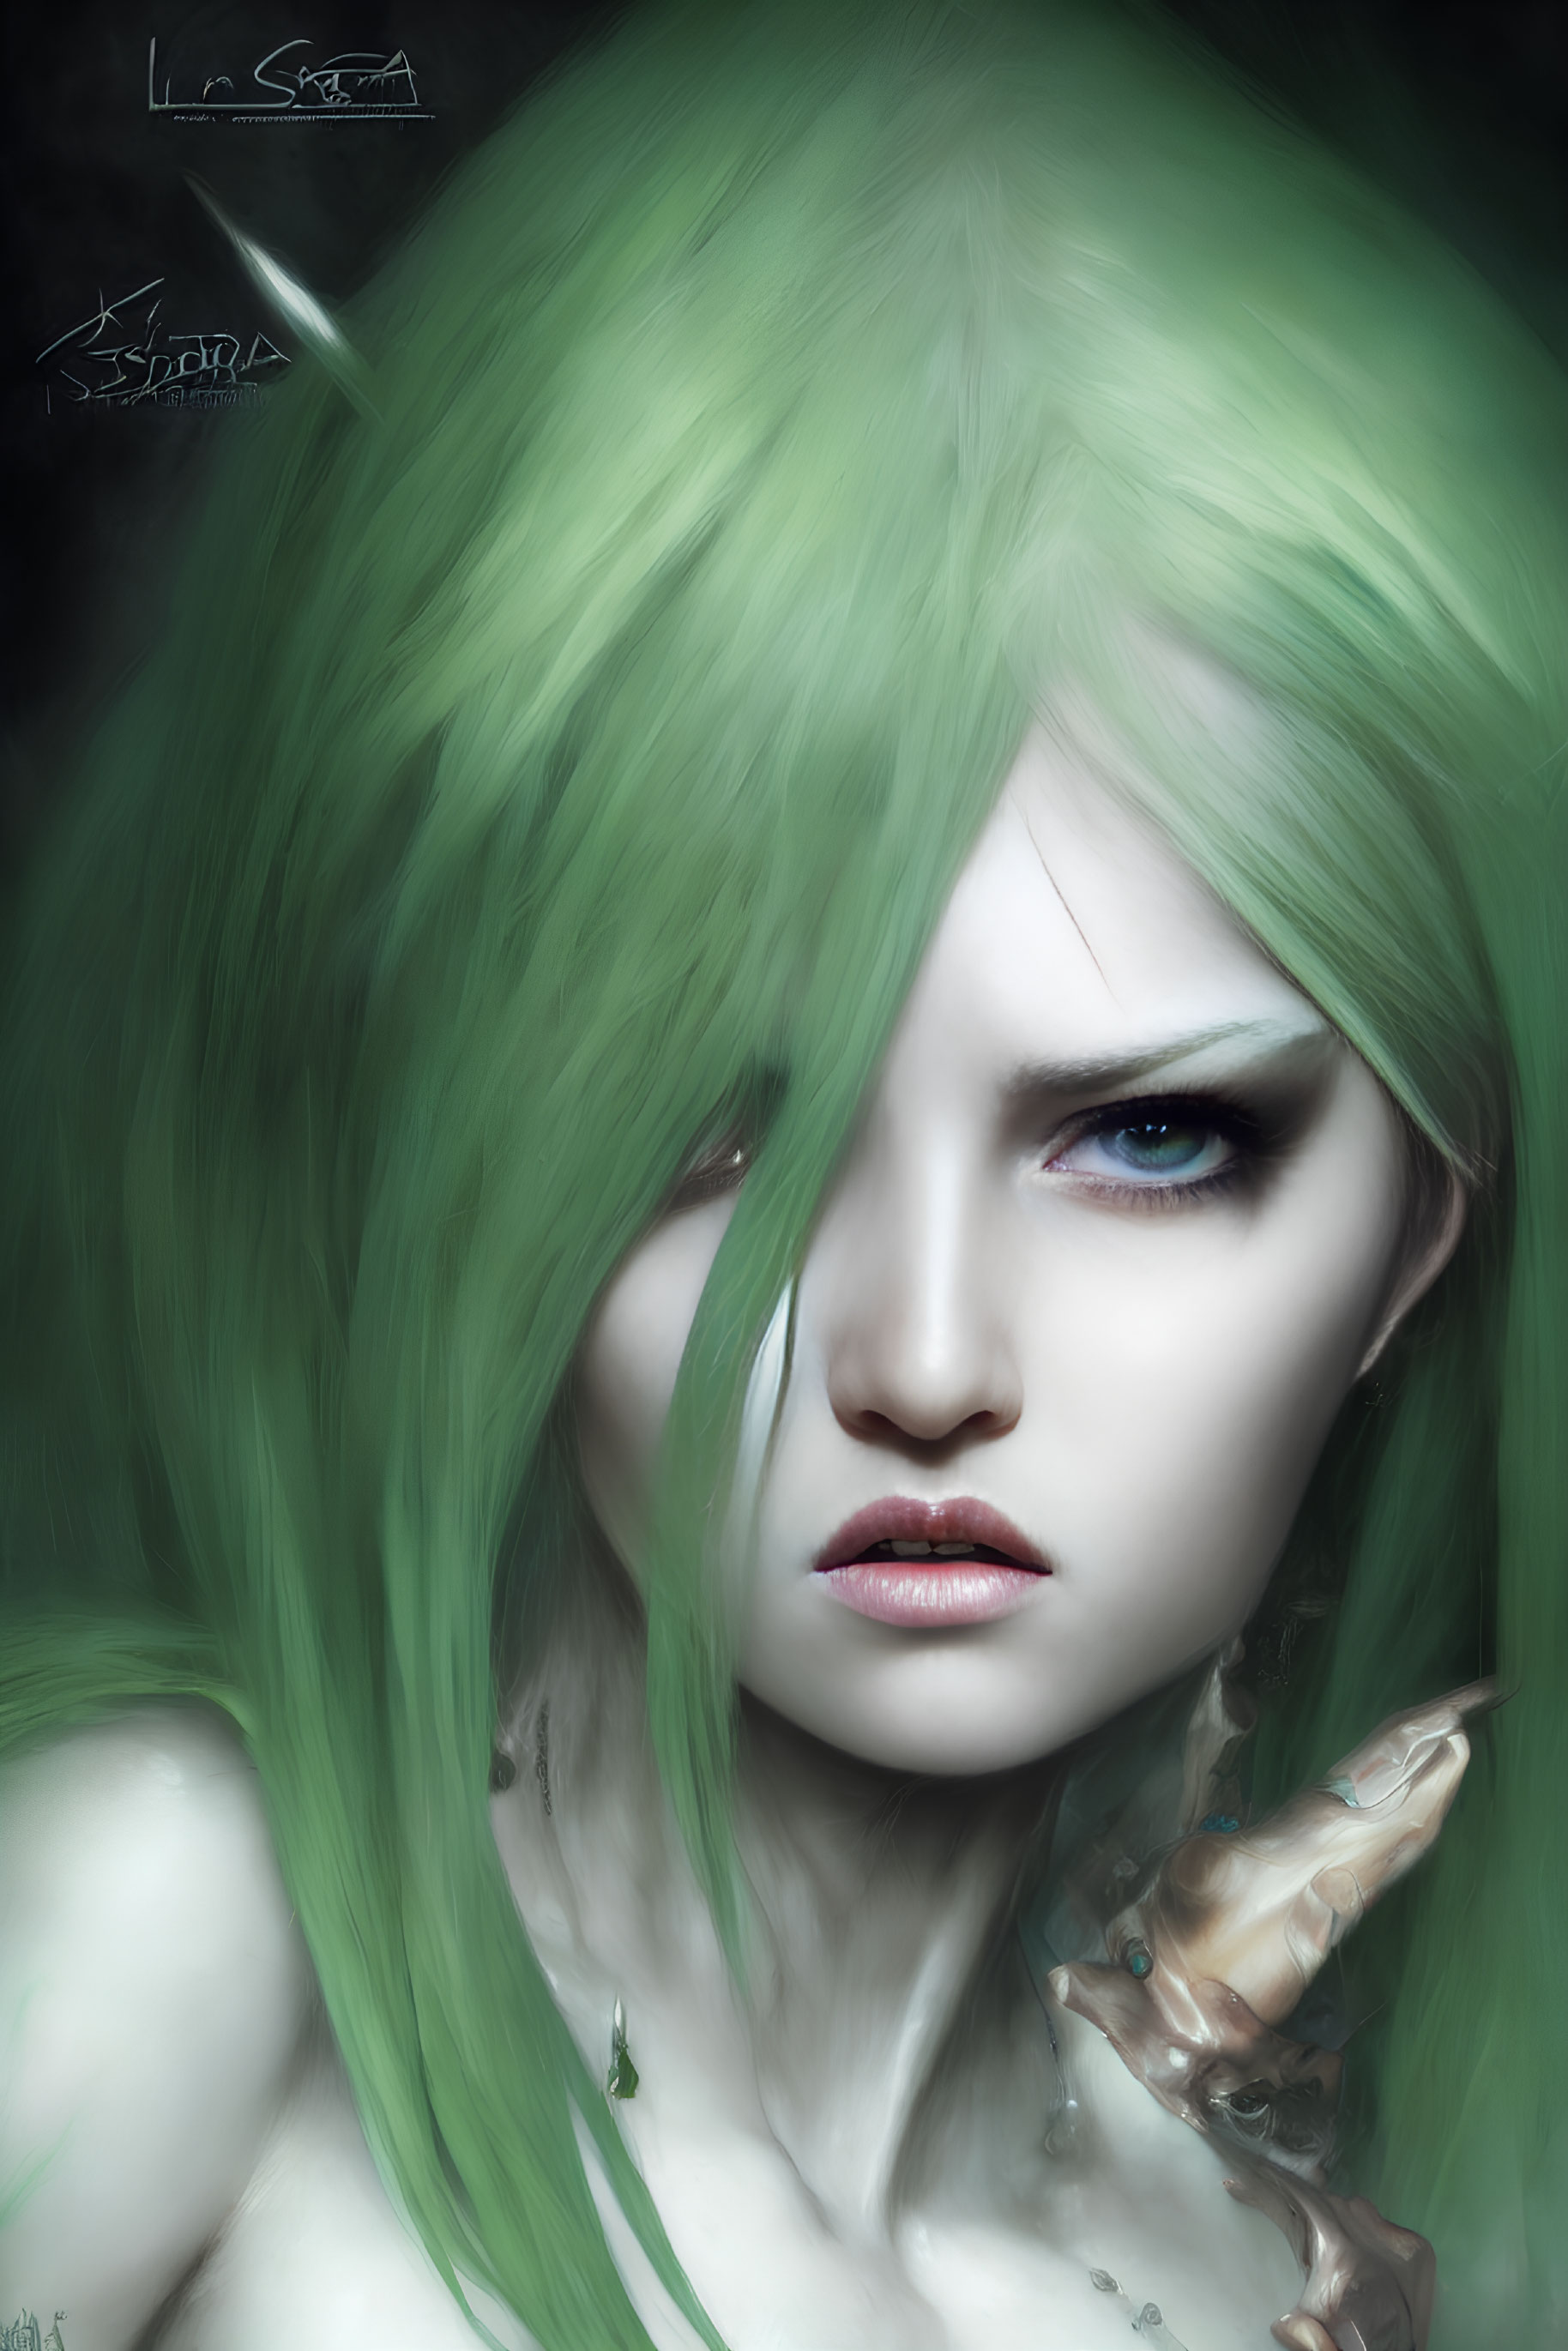 Fantasy illustration of female figure with blue eyes and green hair.